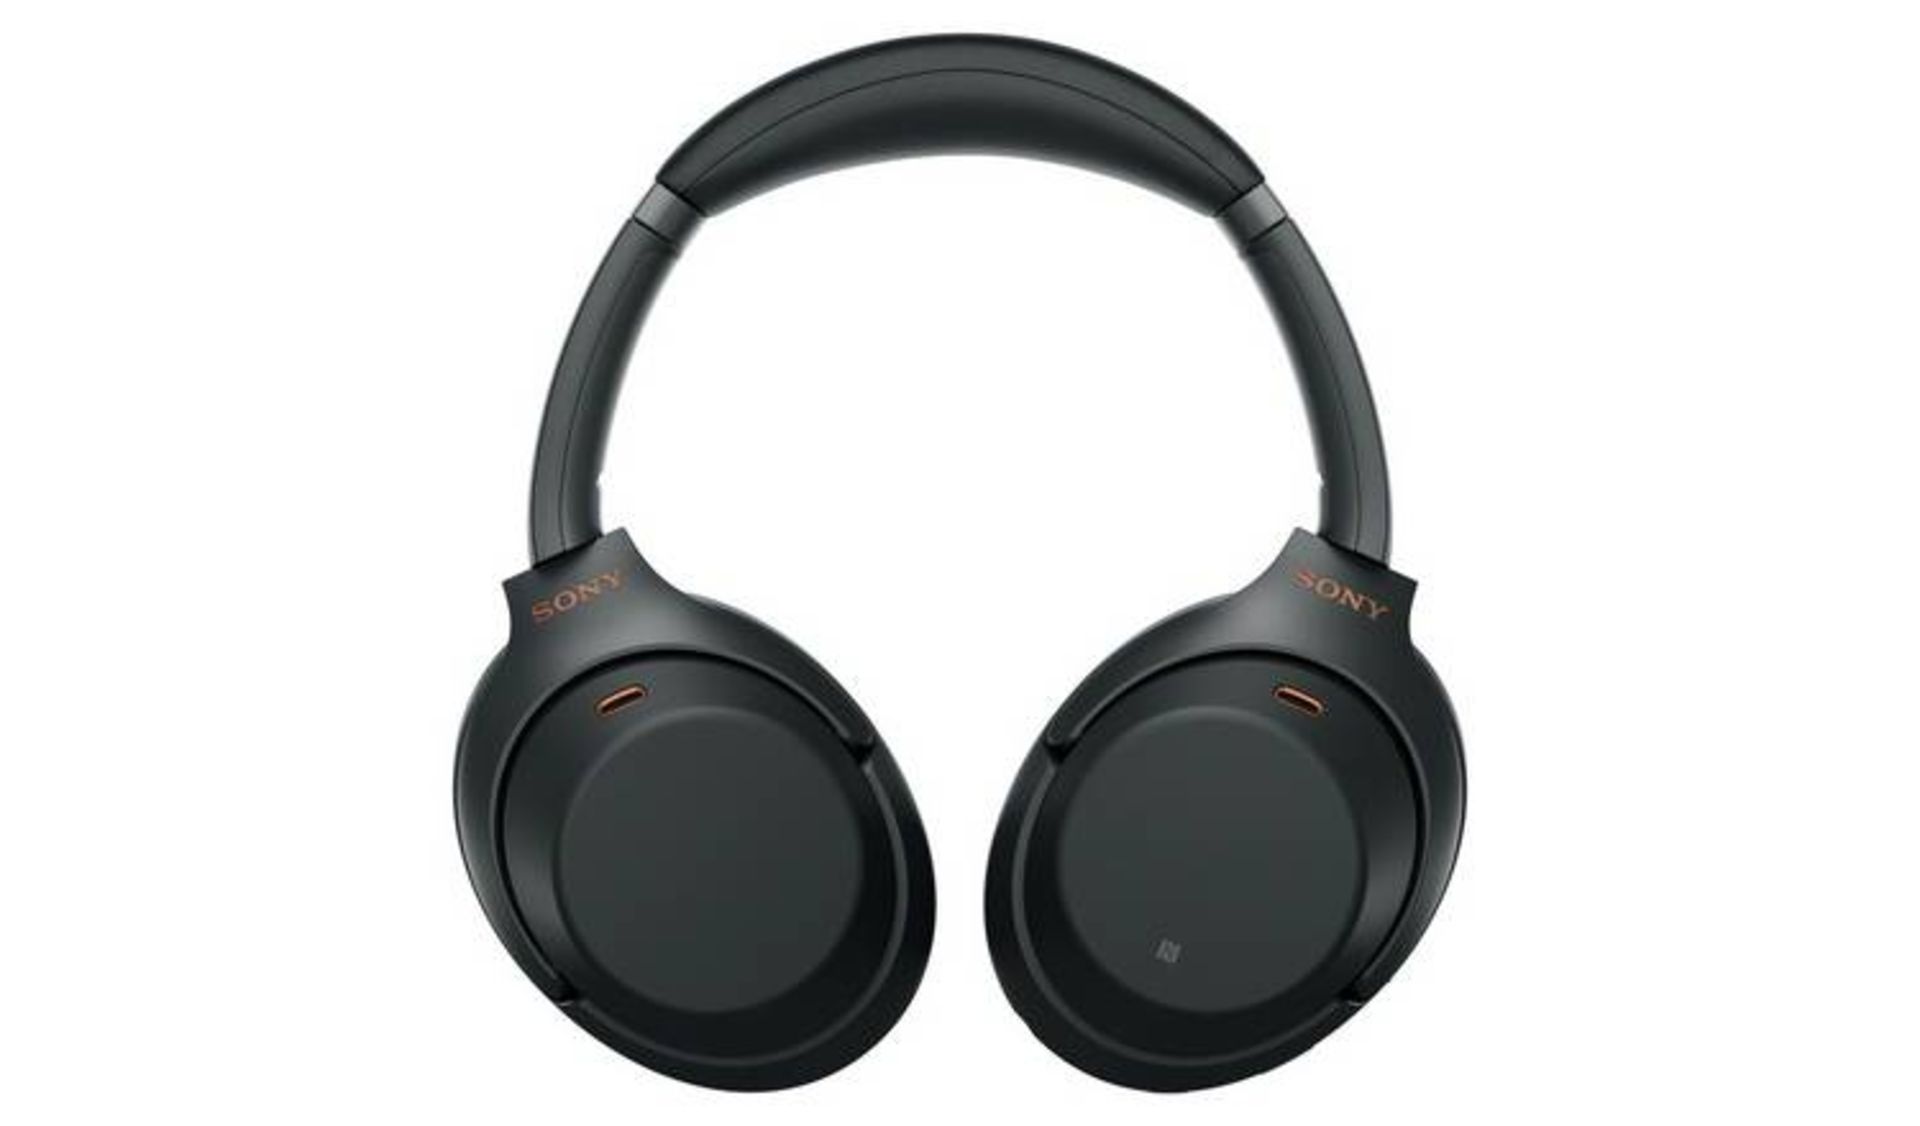 AS NEW CONDITION SONY WH-1000XM3 ON-EAR WIRELESS HEADPHONES - BLACK *NO VAT*